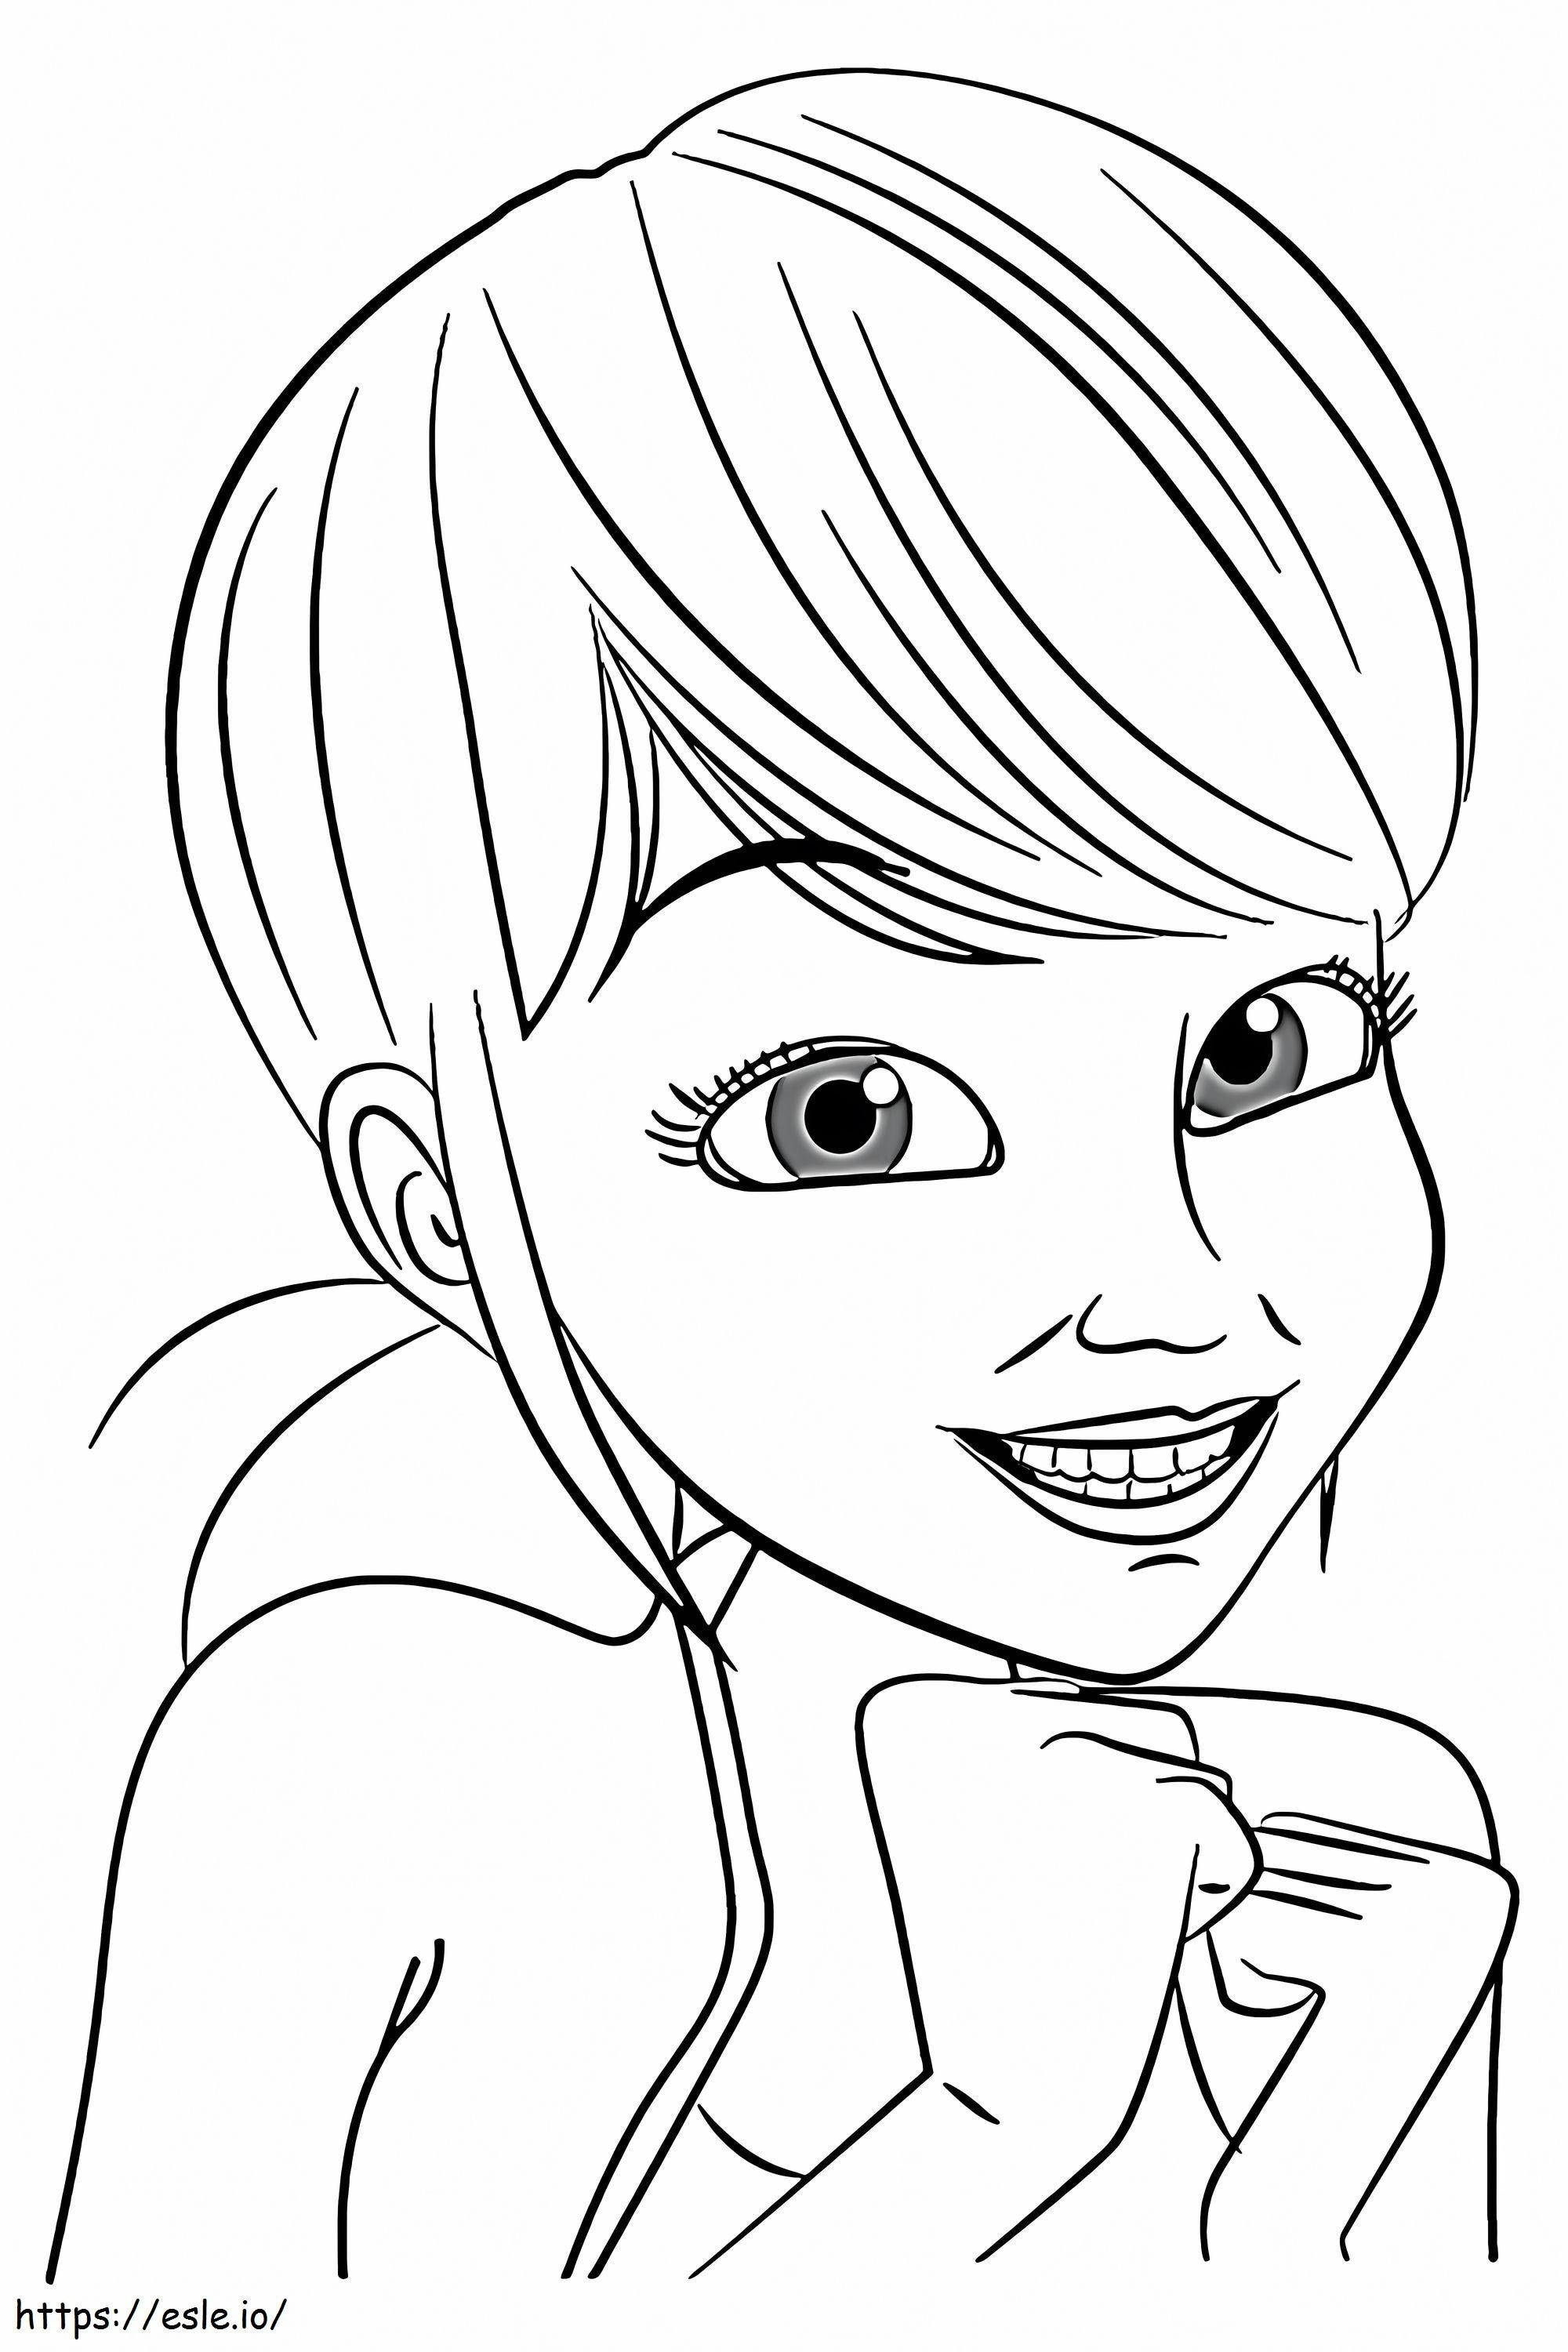 Marinette Dupaincheng coloring page